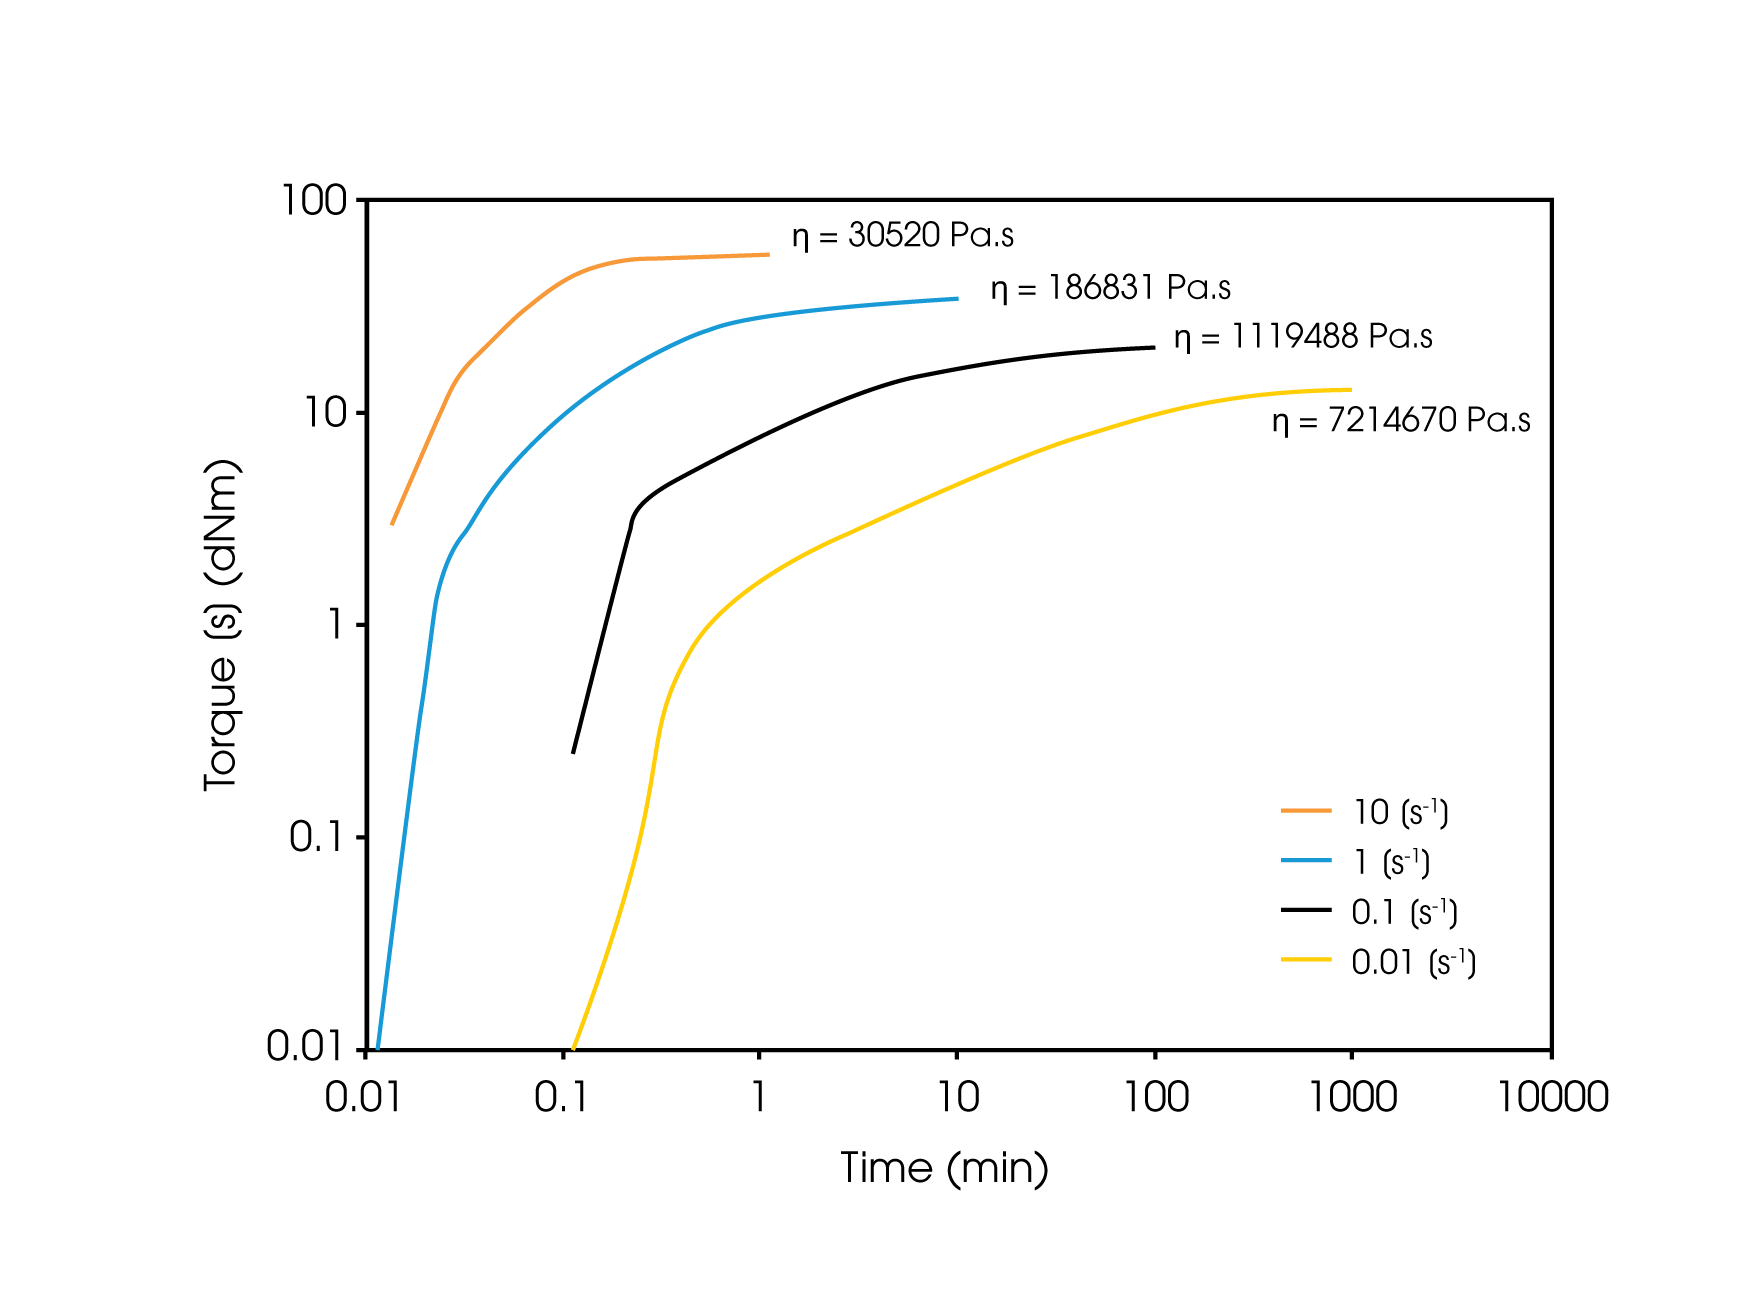 Figure 3. Steady-shear viscosity testing in the RPA for shear rates of 0.01 s-1, 0.1 s-1, 1 s-1, and 10 s-1. The torque increases over time as the sample reaches steady state. The torque value reaches a plateau, indicating that steady state has been reached.